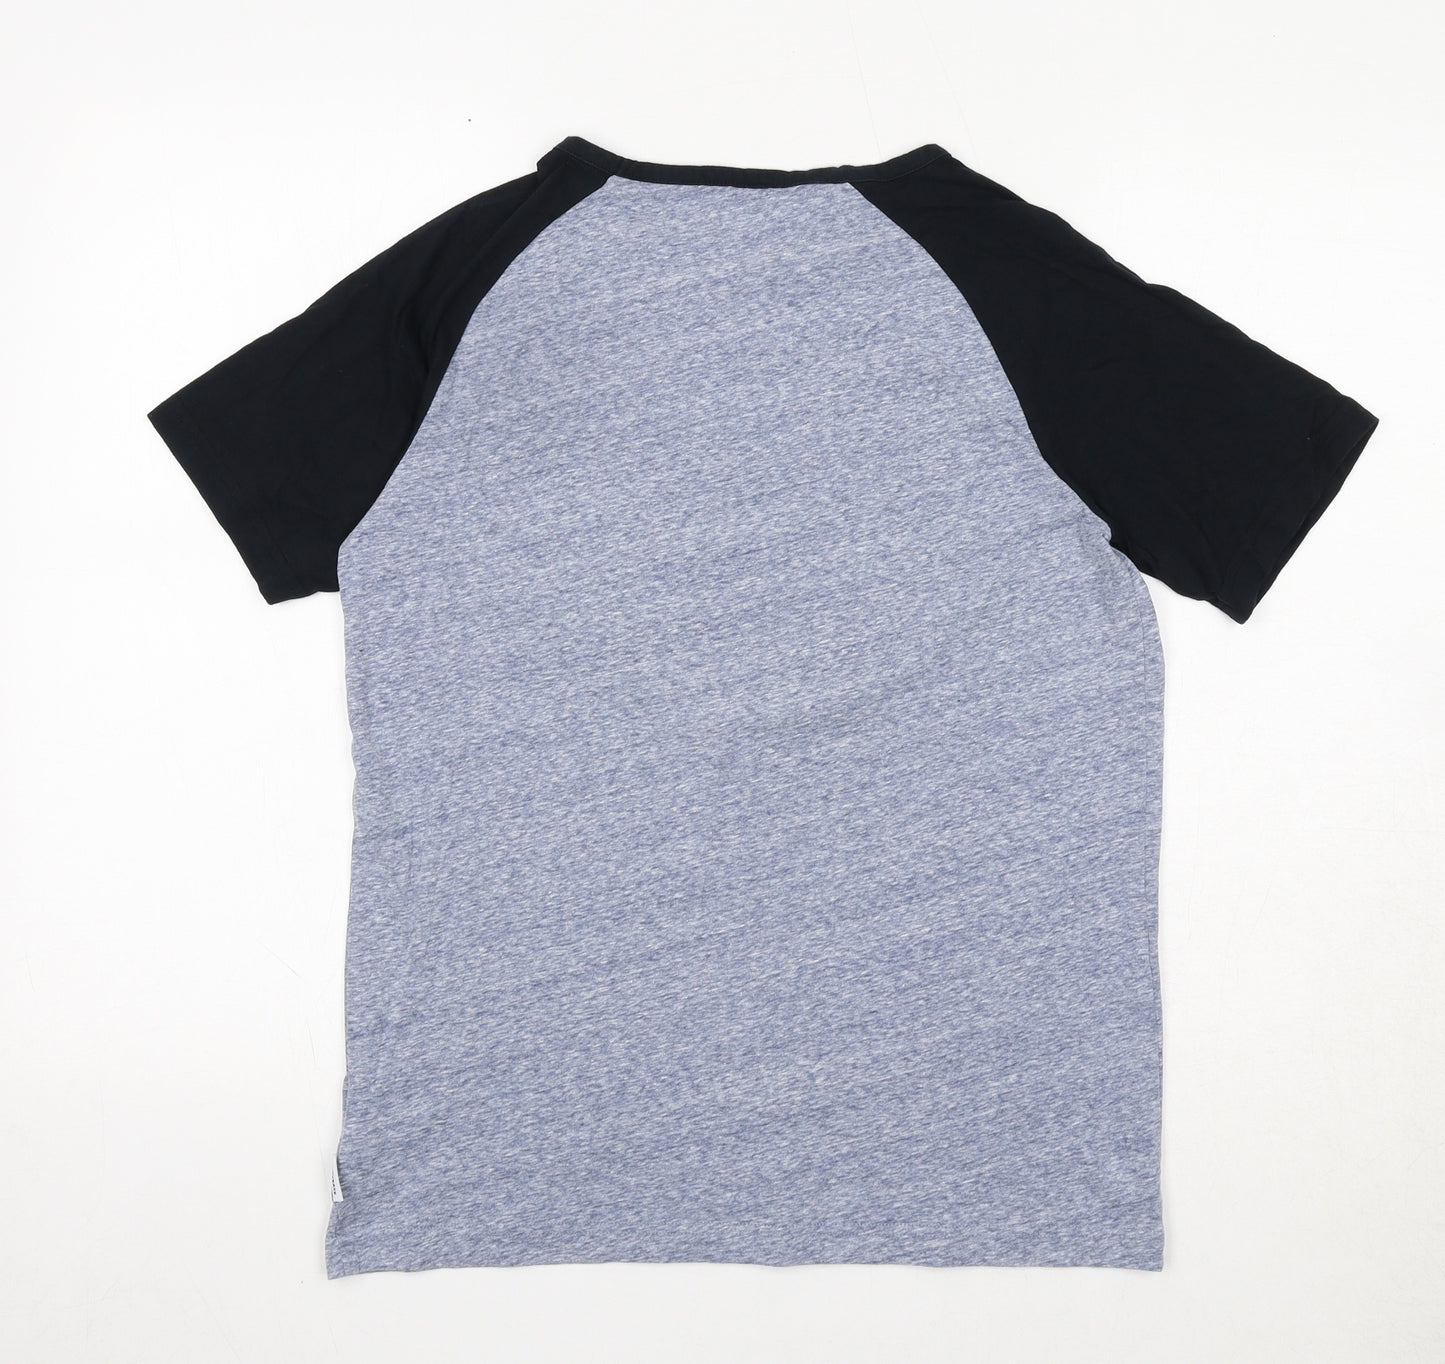 Converse Boys Blue Cotton Basic T-Shirt Size 13 Years Round Neck Pullover - Size 13-15 Years